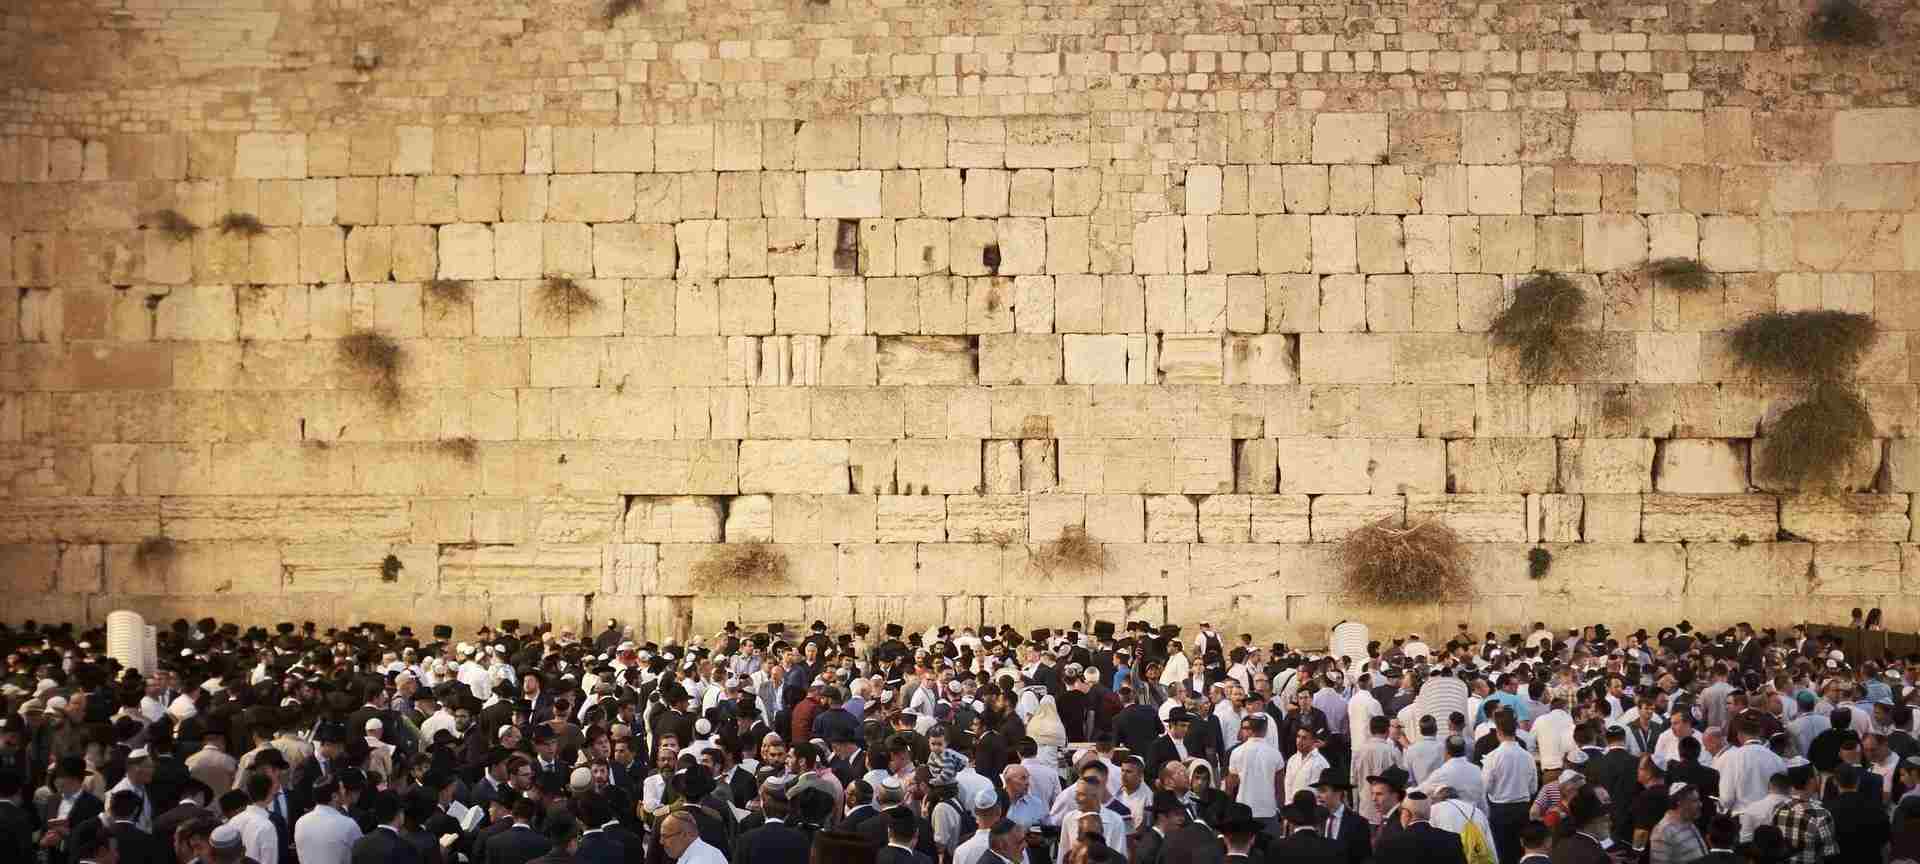 the walls of the Holy of Holies